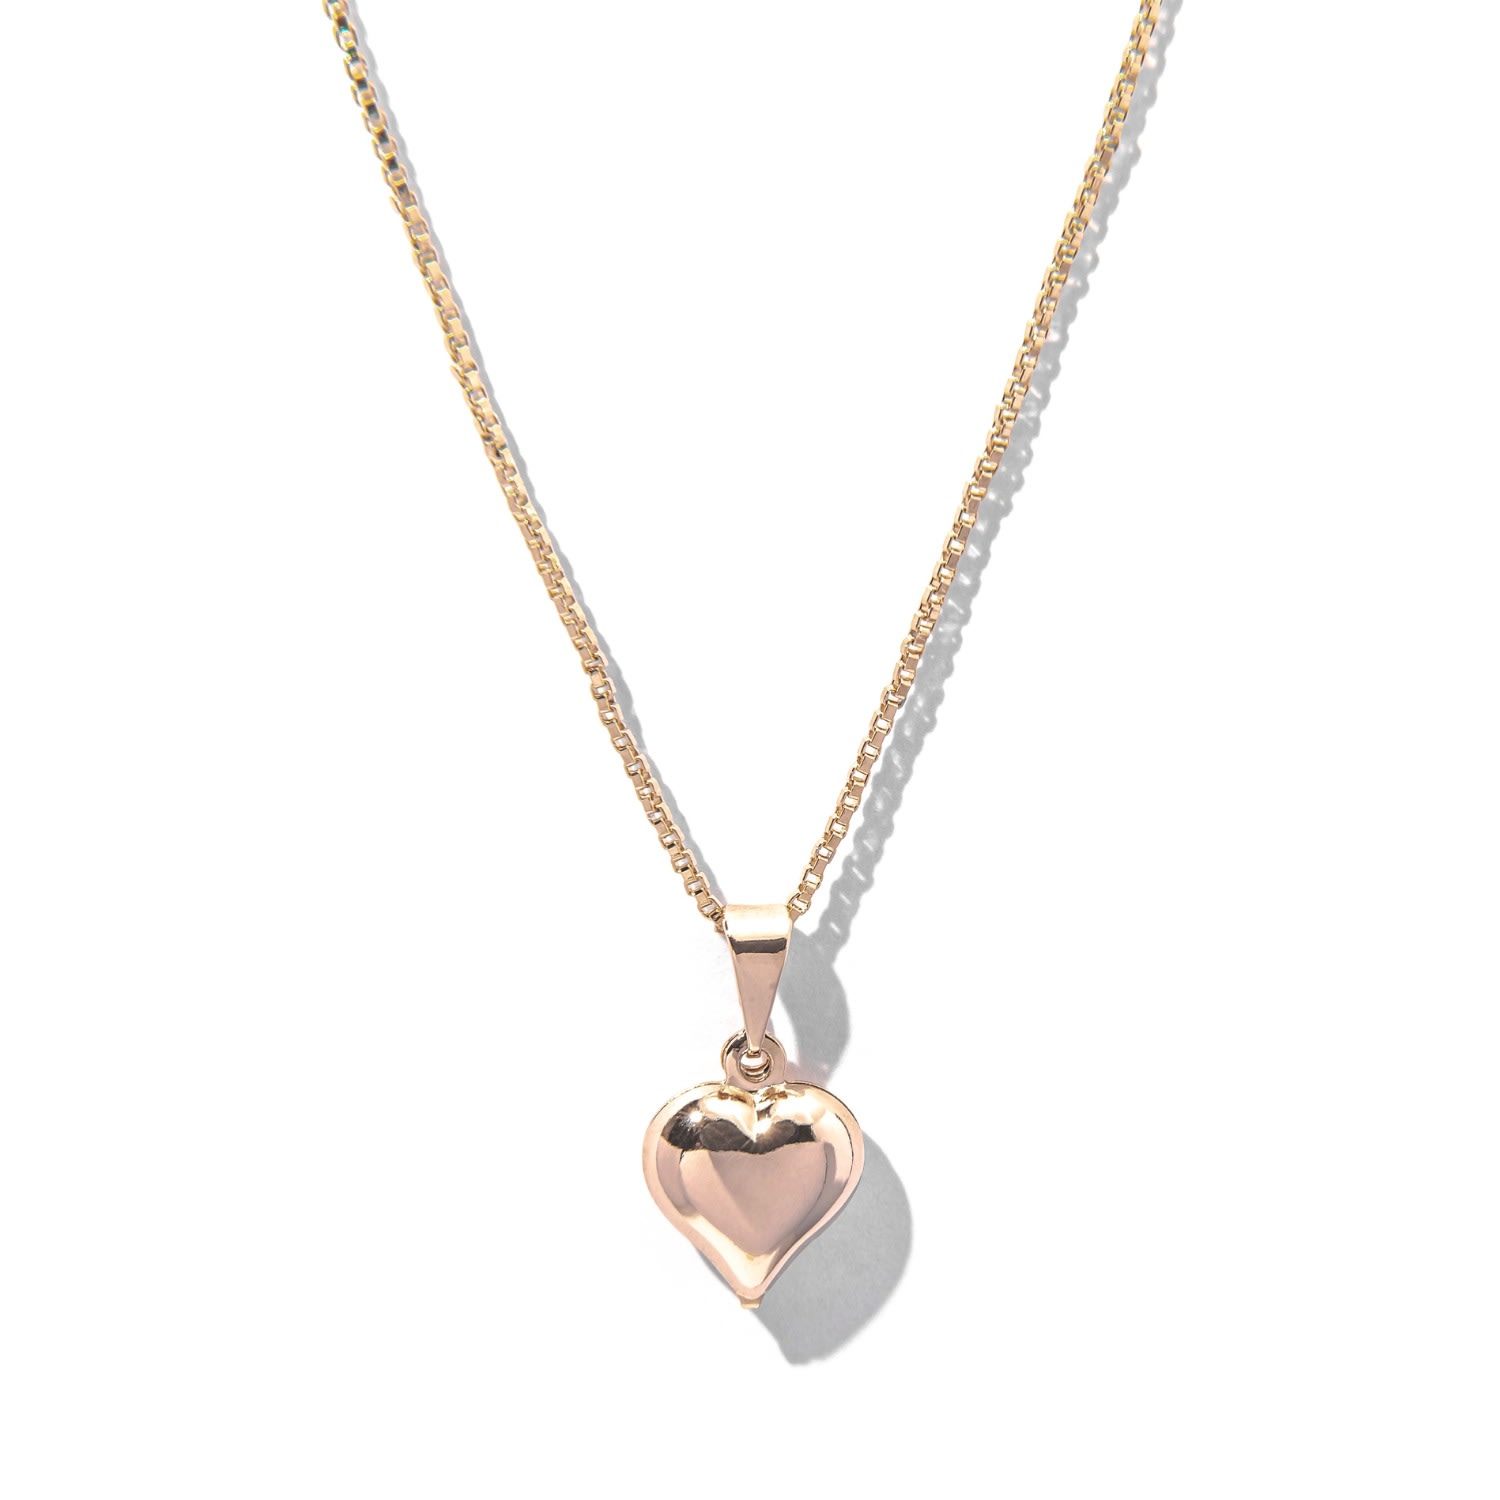 Women's Gold Filled Heart Pendant Necklace The Essential Jewels